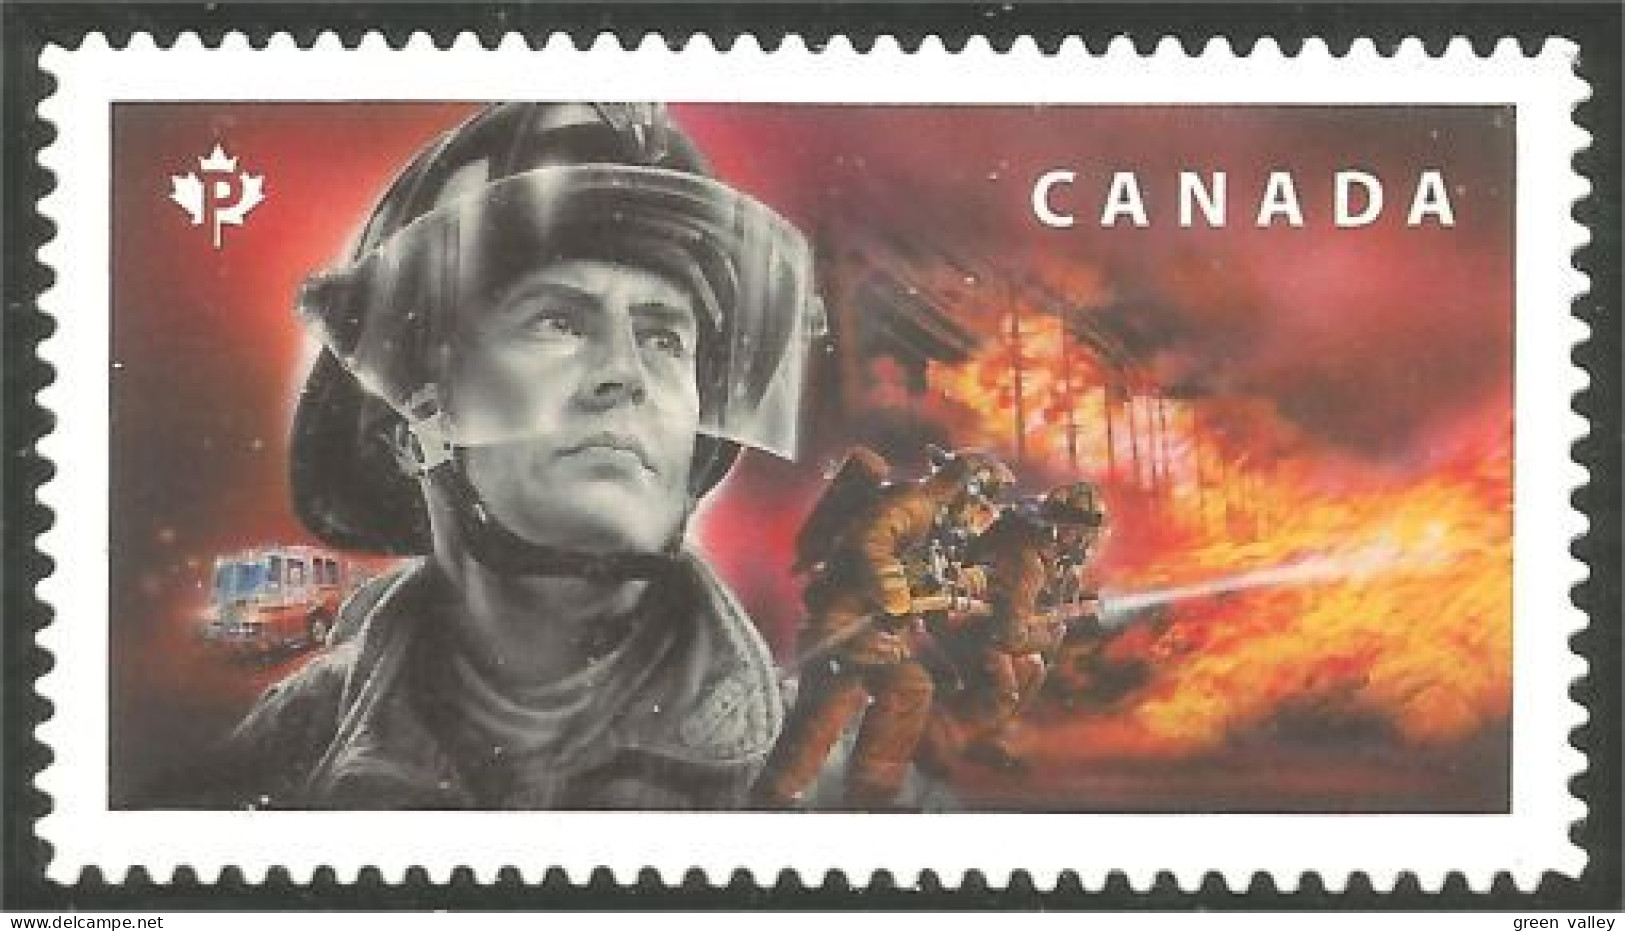 Canada Firefighters Pompiers Bomberos Truck Annual Collection Annuelle MNH ** Neuf SC (C31-25c) - Trucks